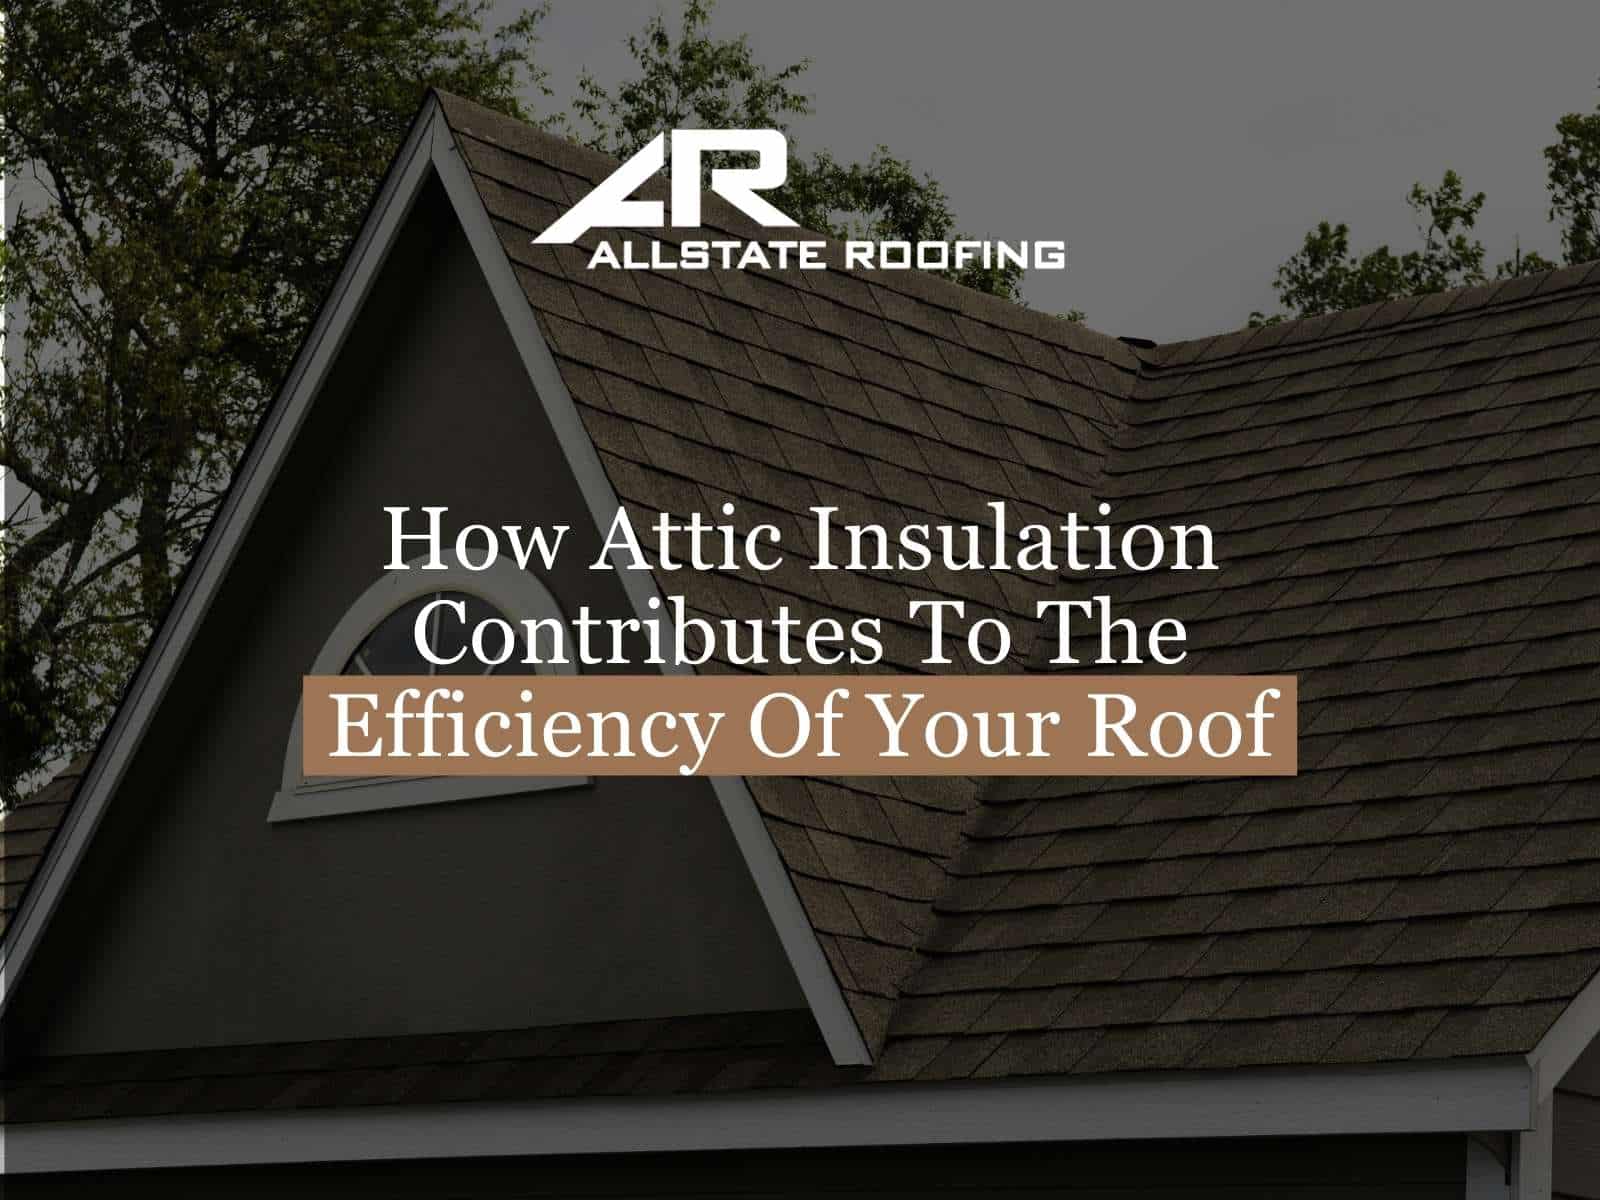 How Attic Insulation Contributes To The Efficiency Of Your Roof